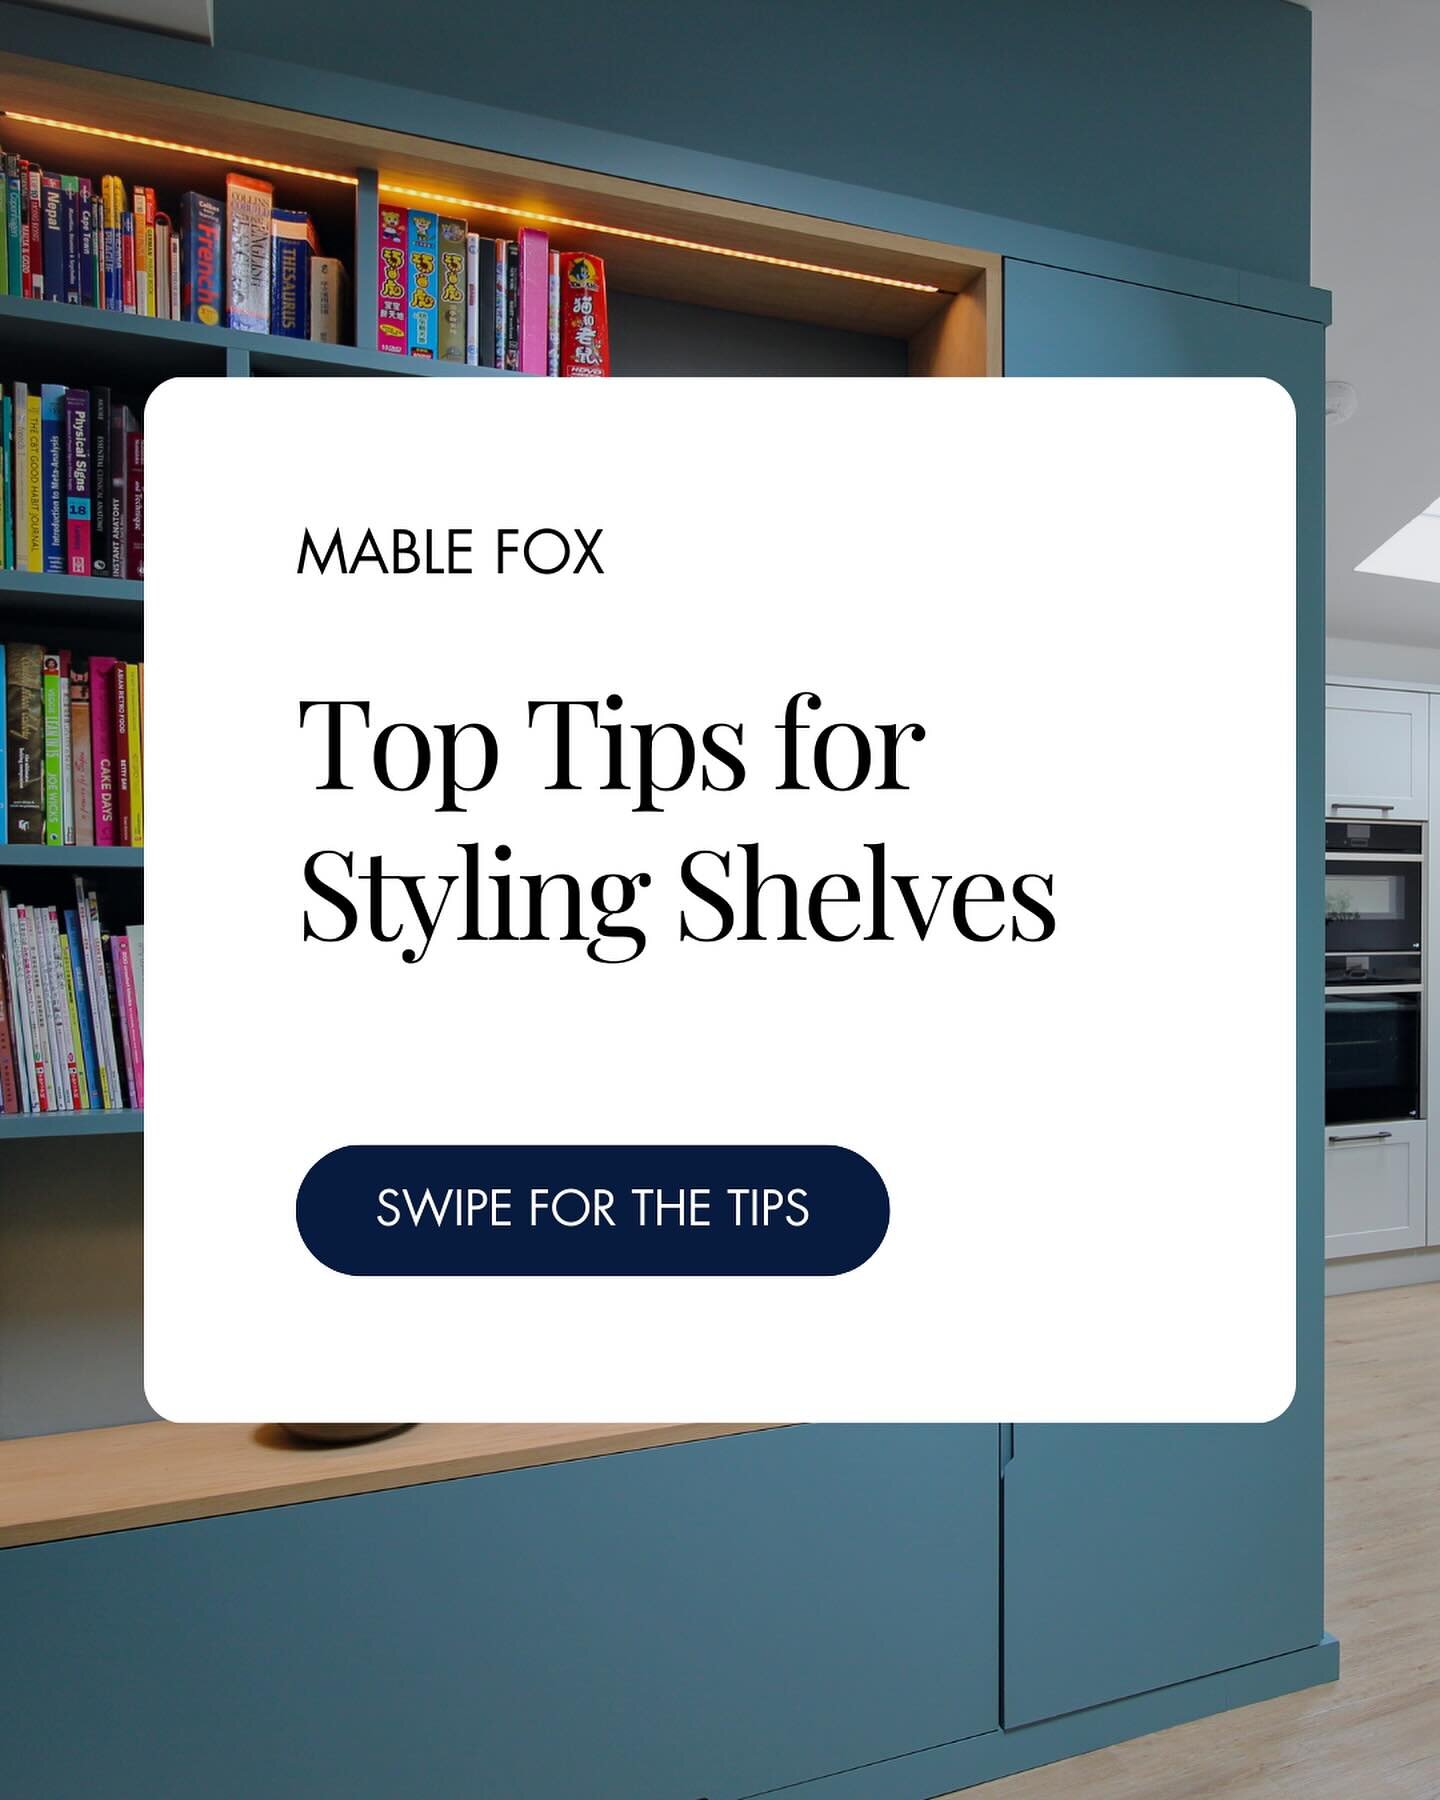 A great way to refresh a room without spending a fortune (let&rsquo;s face it, January can be tough) is to restyle your shelves. If you are not sure where to start, swipe left to discover our top tips on shelf styling.

#MabelFox #Interiordesign #Int